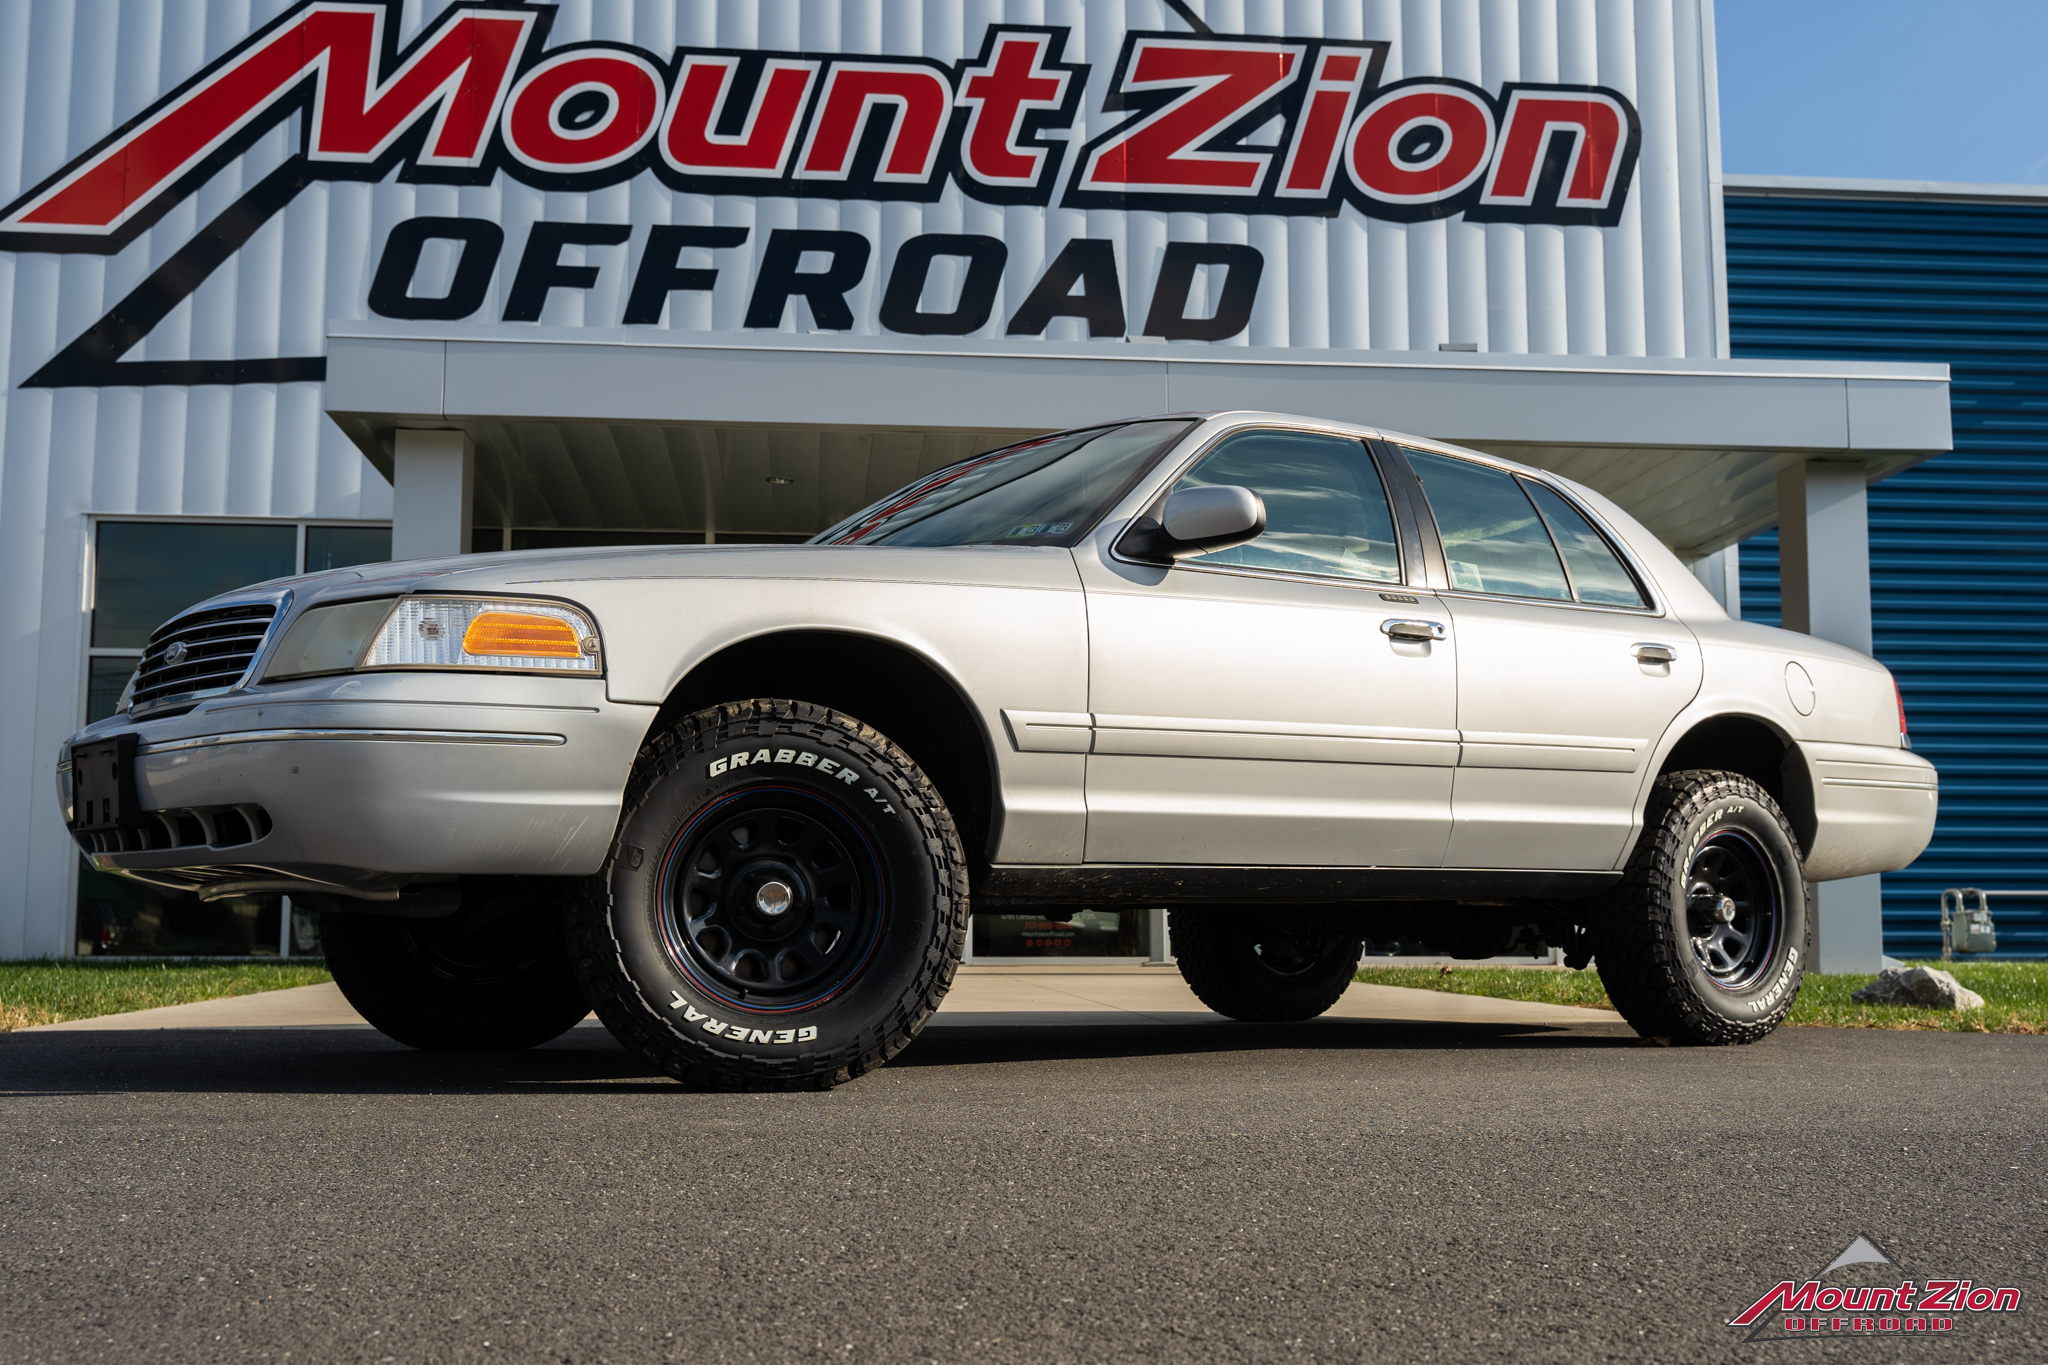 1998 Ford Crown Victoria LX - Mount Zion Offroad